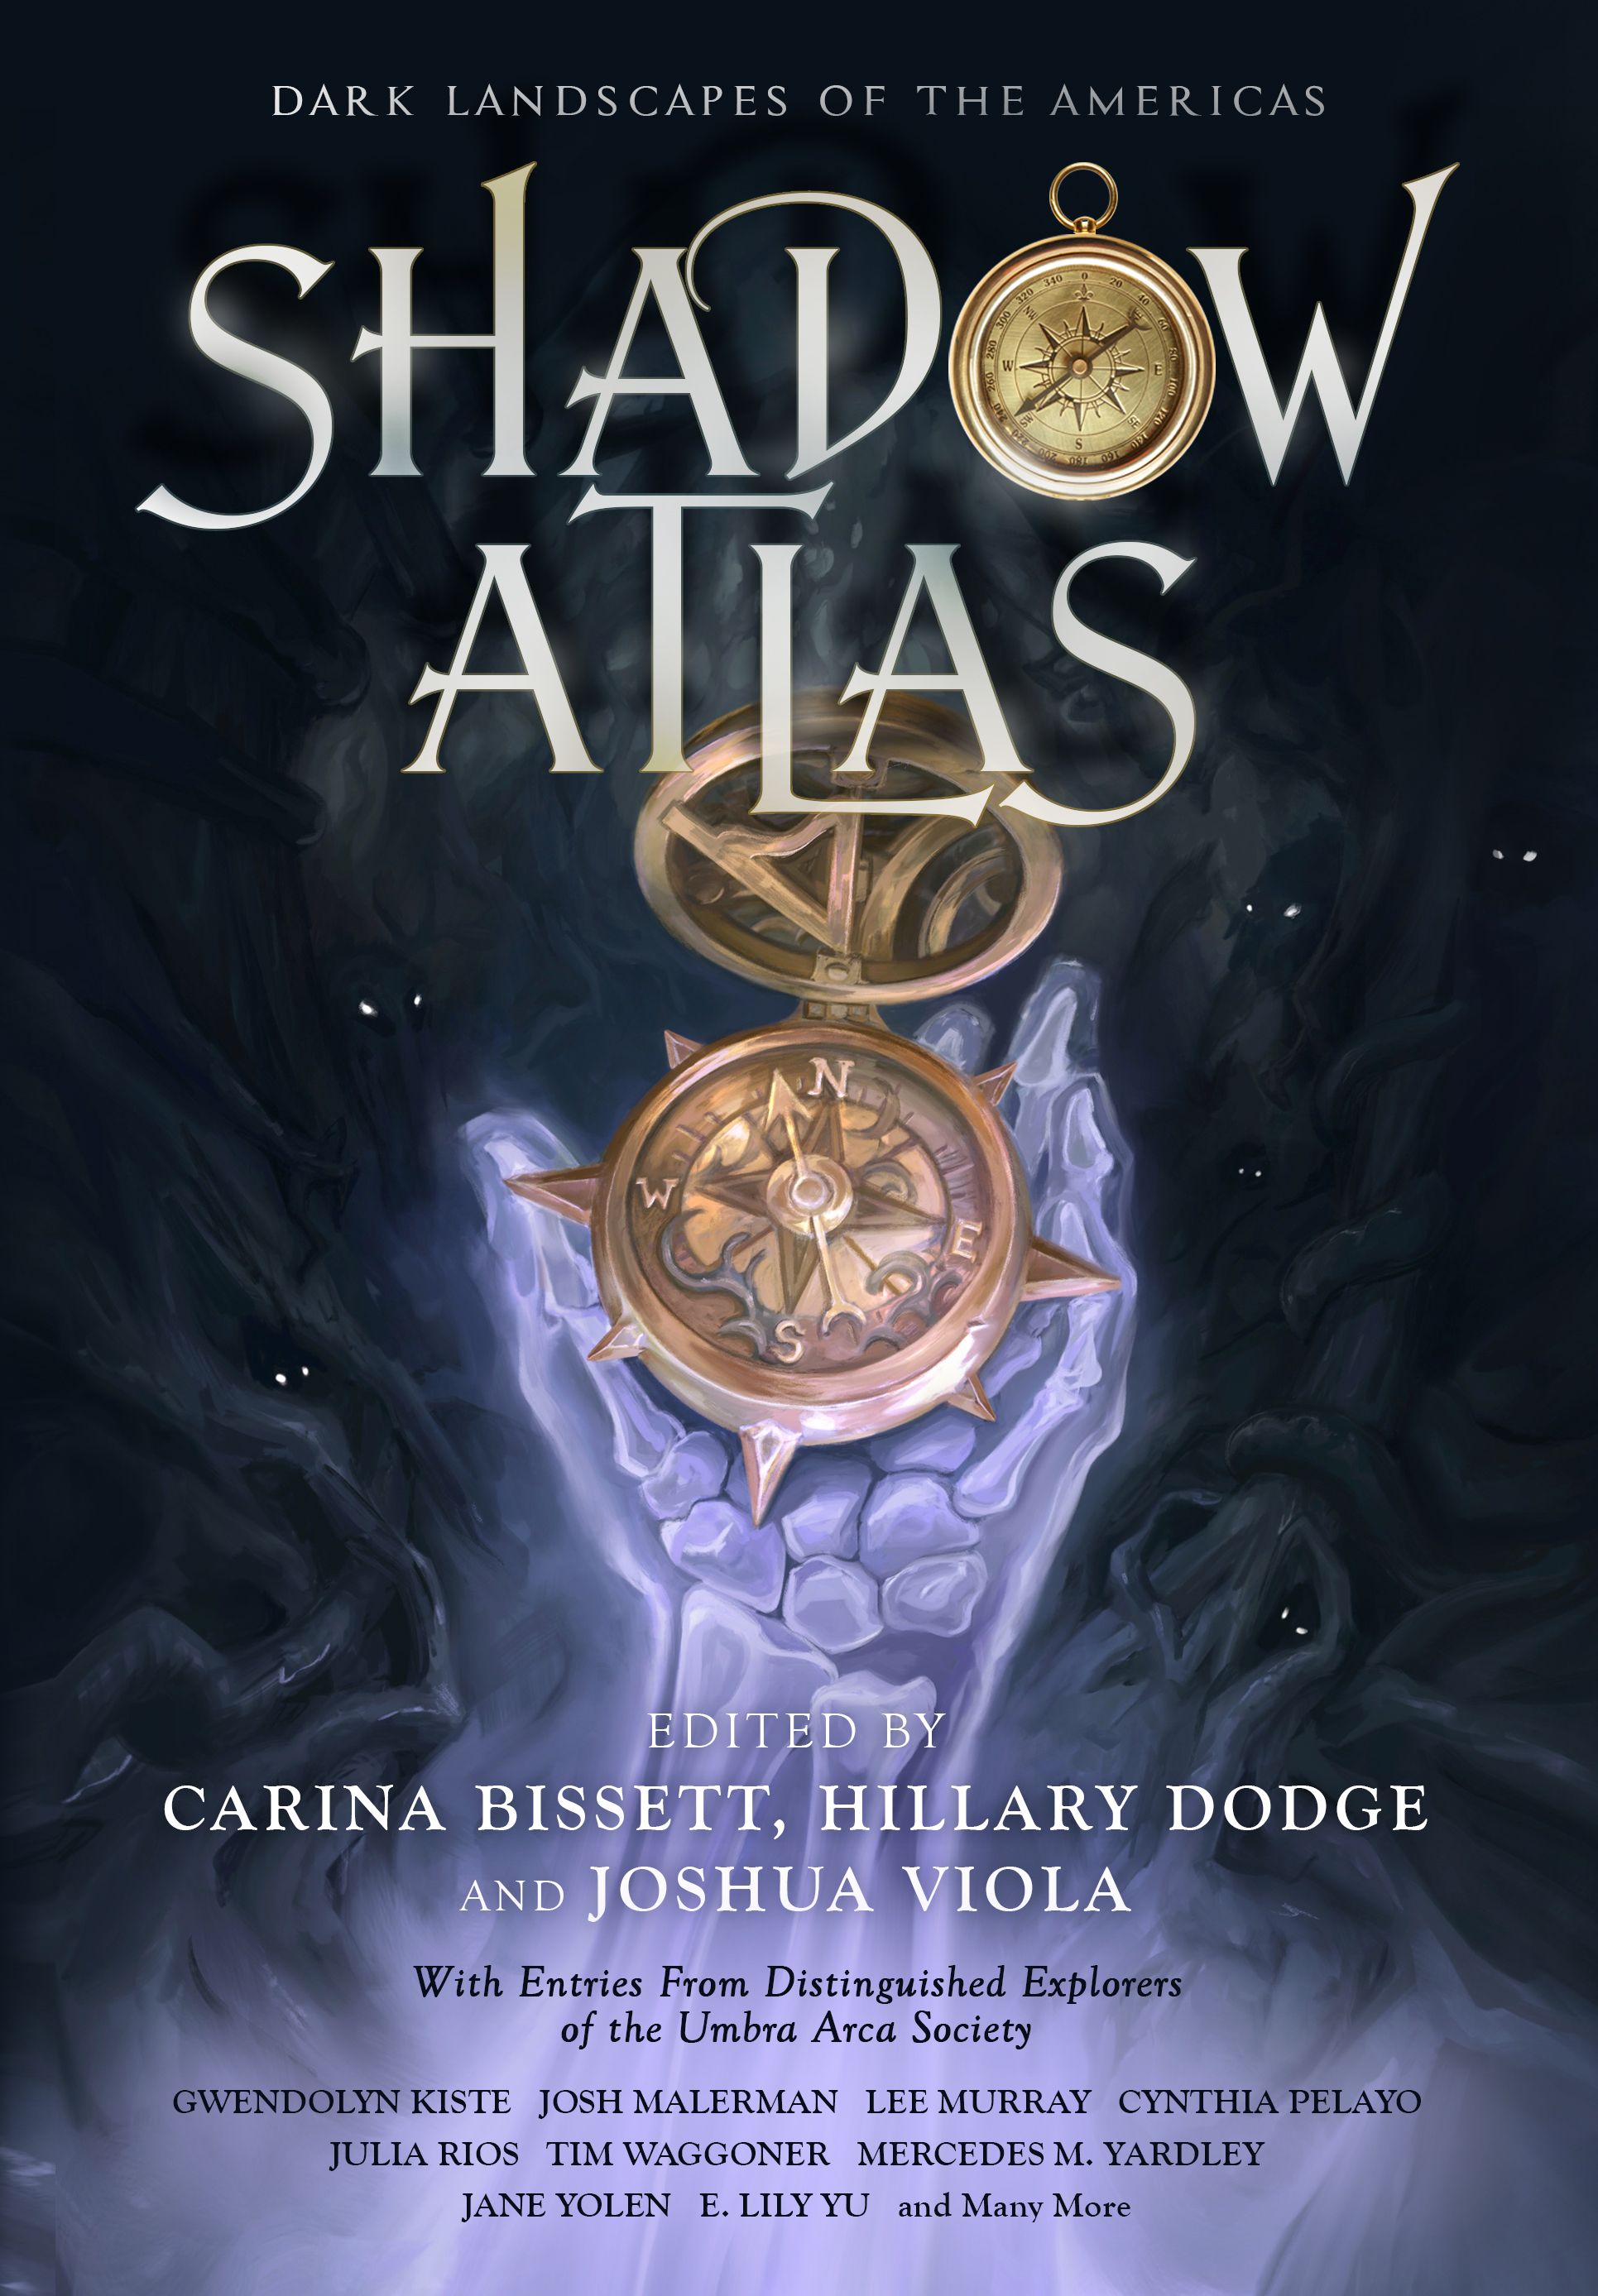 Front cover of Shadow Atlas: Dark Landscapes of the Americas, edited by Carina Bissett, Hillary Dodge, and Joshua Viola. The illustration shows a luminously lavender skeletal hand holding a golden compass against a background full of indistinct shadow figures peering out from the darkness. Below the editor credits is the text, "With Entries From Distinguished Explorers of the Umbra Arca Society" and below that appears a list of contributor names: Gwendolyn Kiste, Joshua Malerman, Lee Murray, Cynthia Pelayo, Julia Rios, Tim Waggoner, Mercedes M. Yardley, Jane Yolen, E. Lily Yu, and Many More